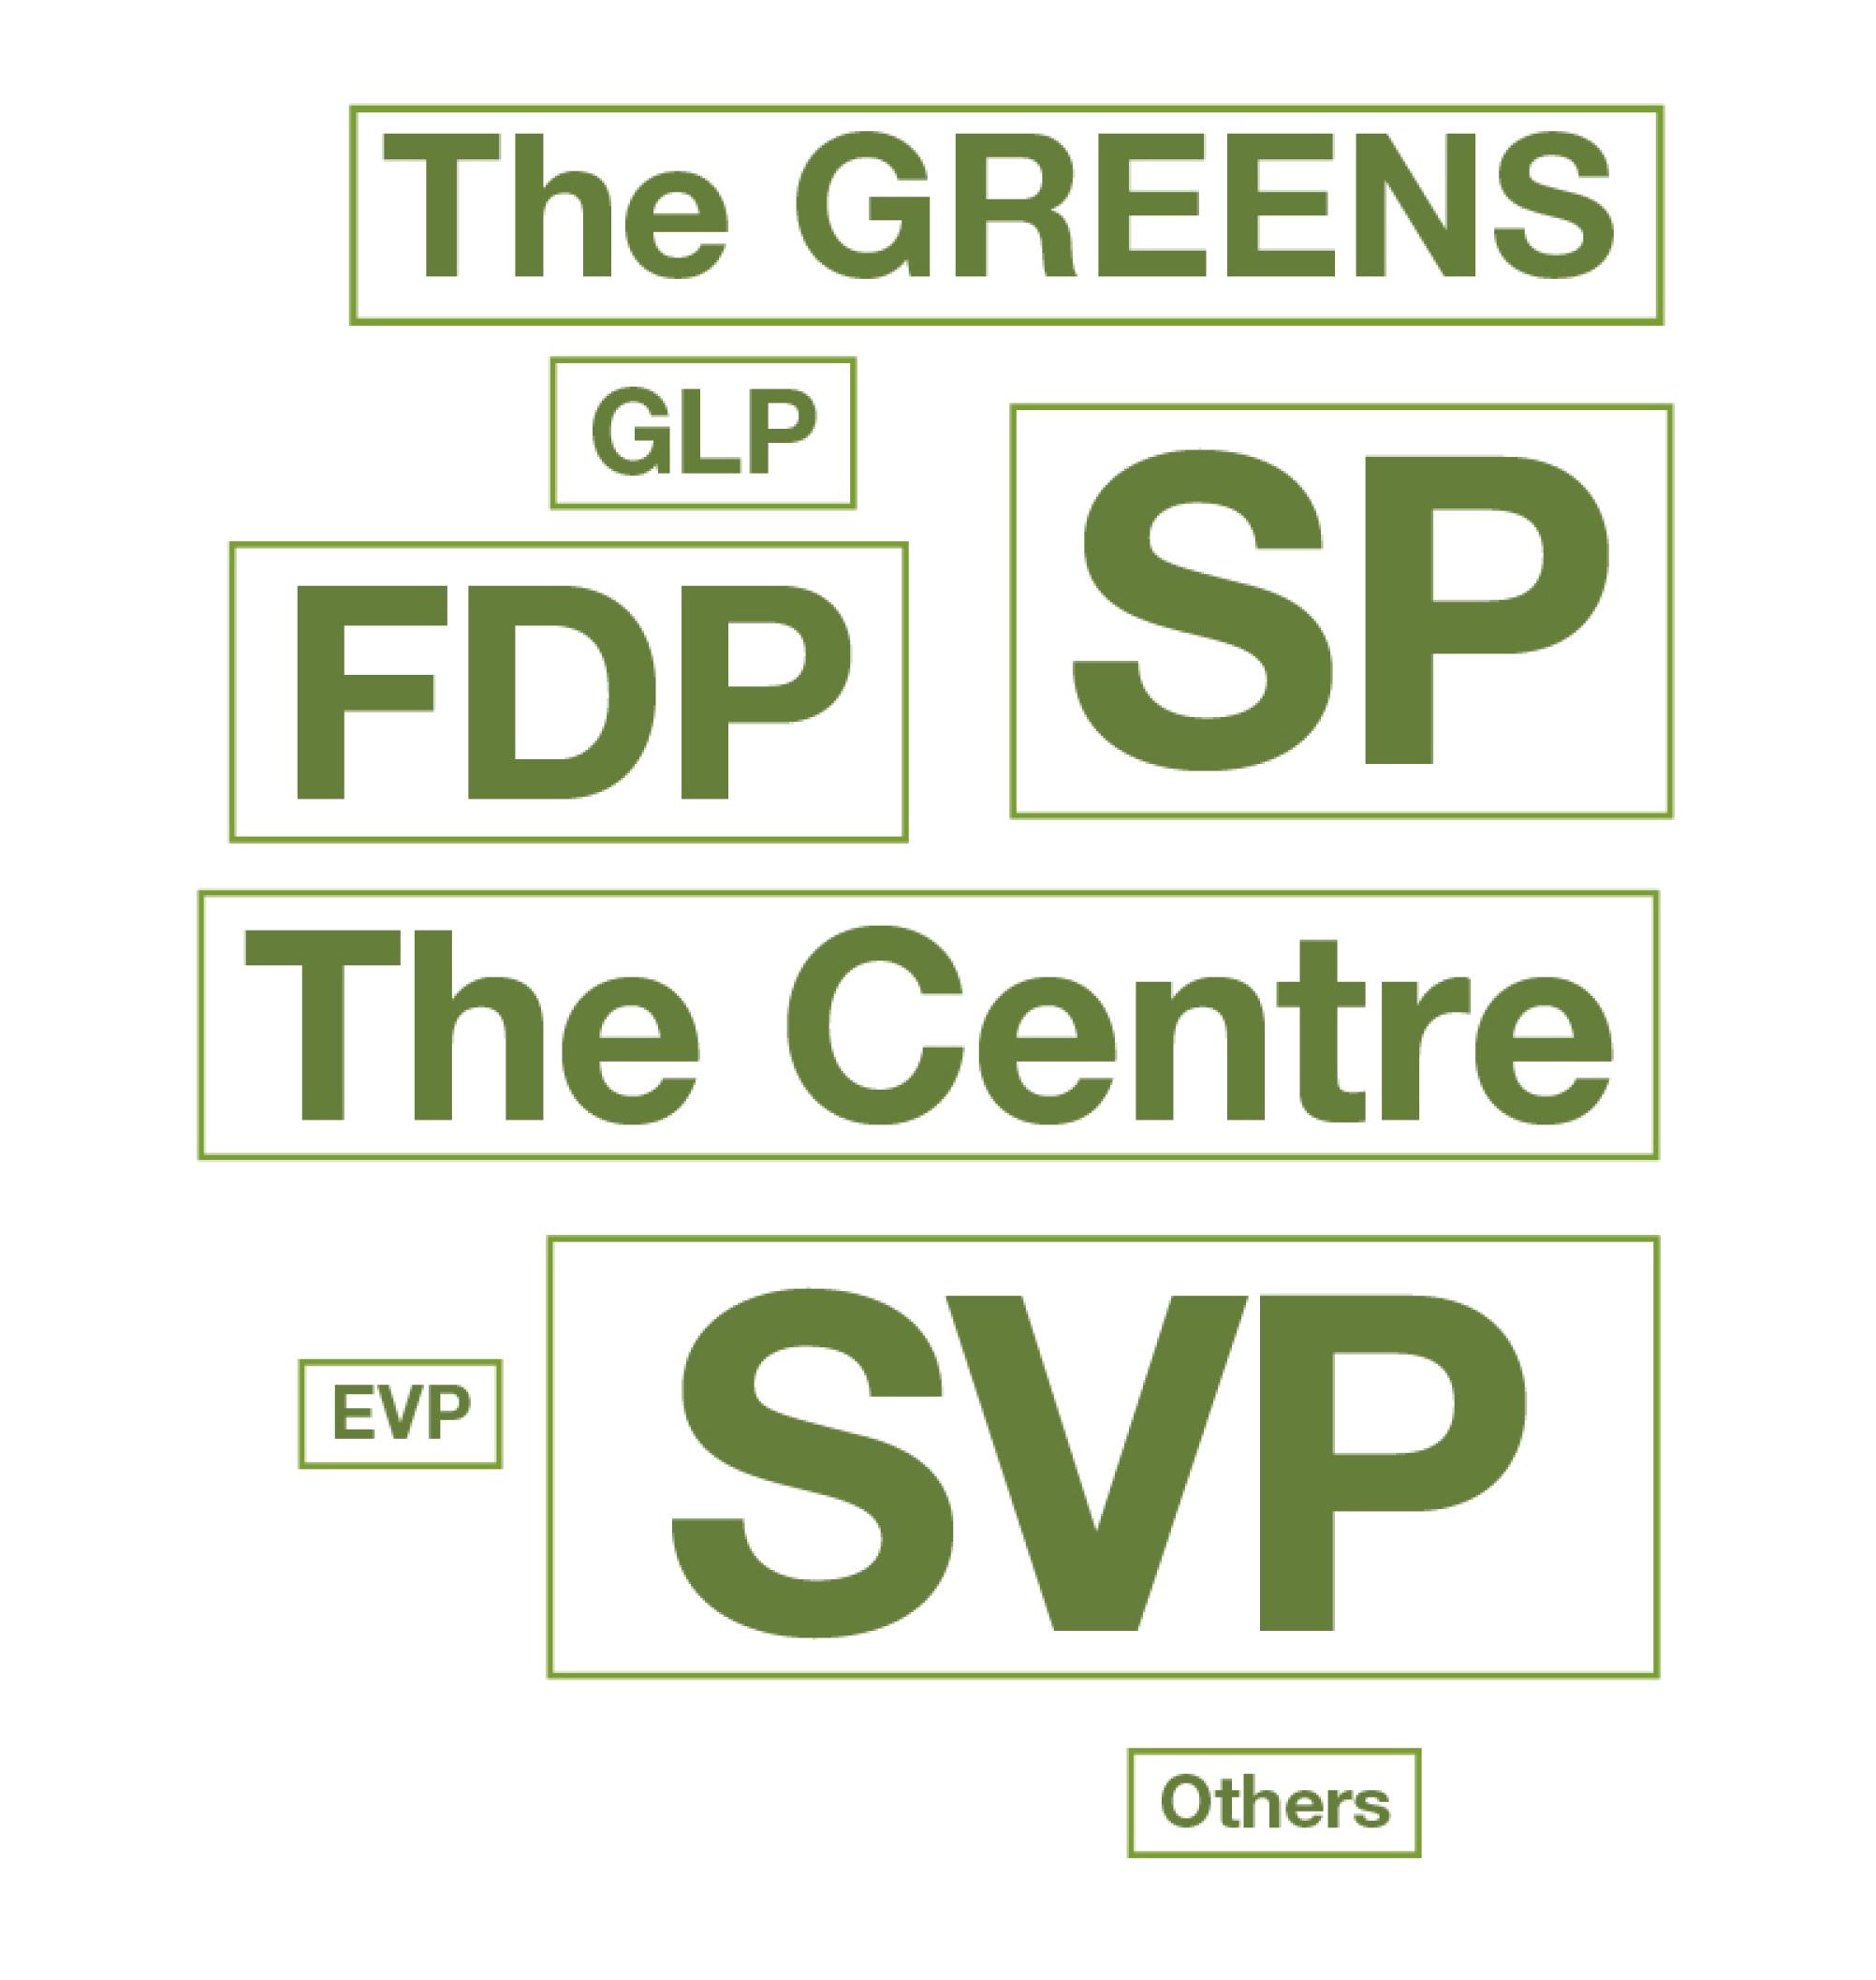 In order of importance, Switzerland’s political landscape: SVP, SP, FDP, The Centre, The Greens, GLP, EVP, Others.